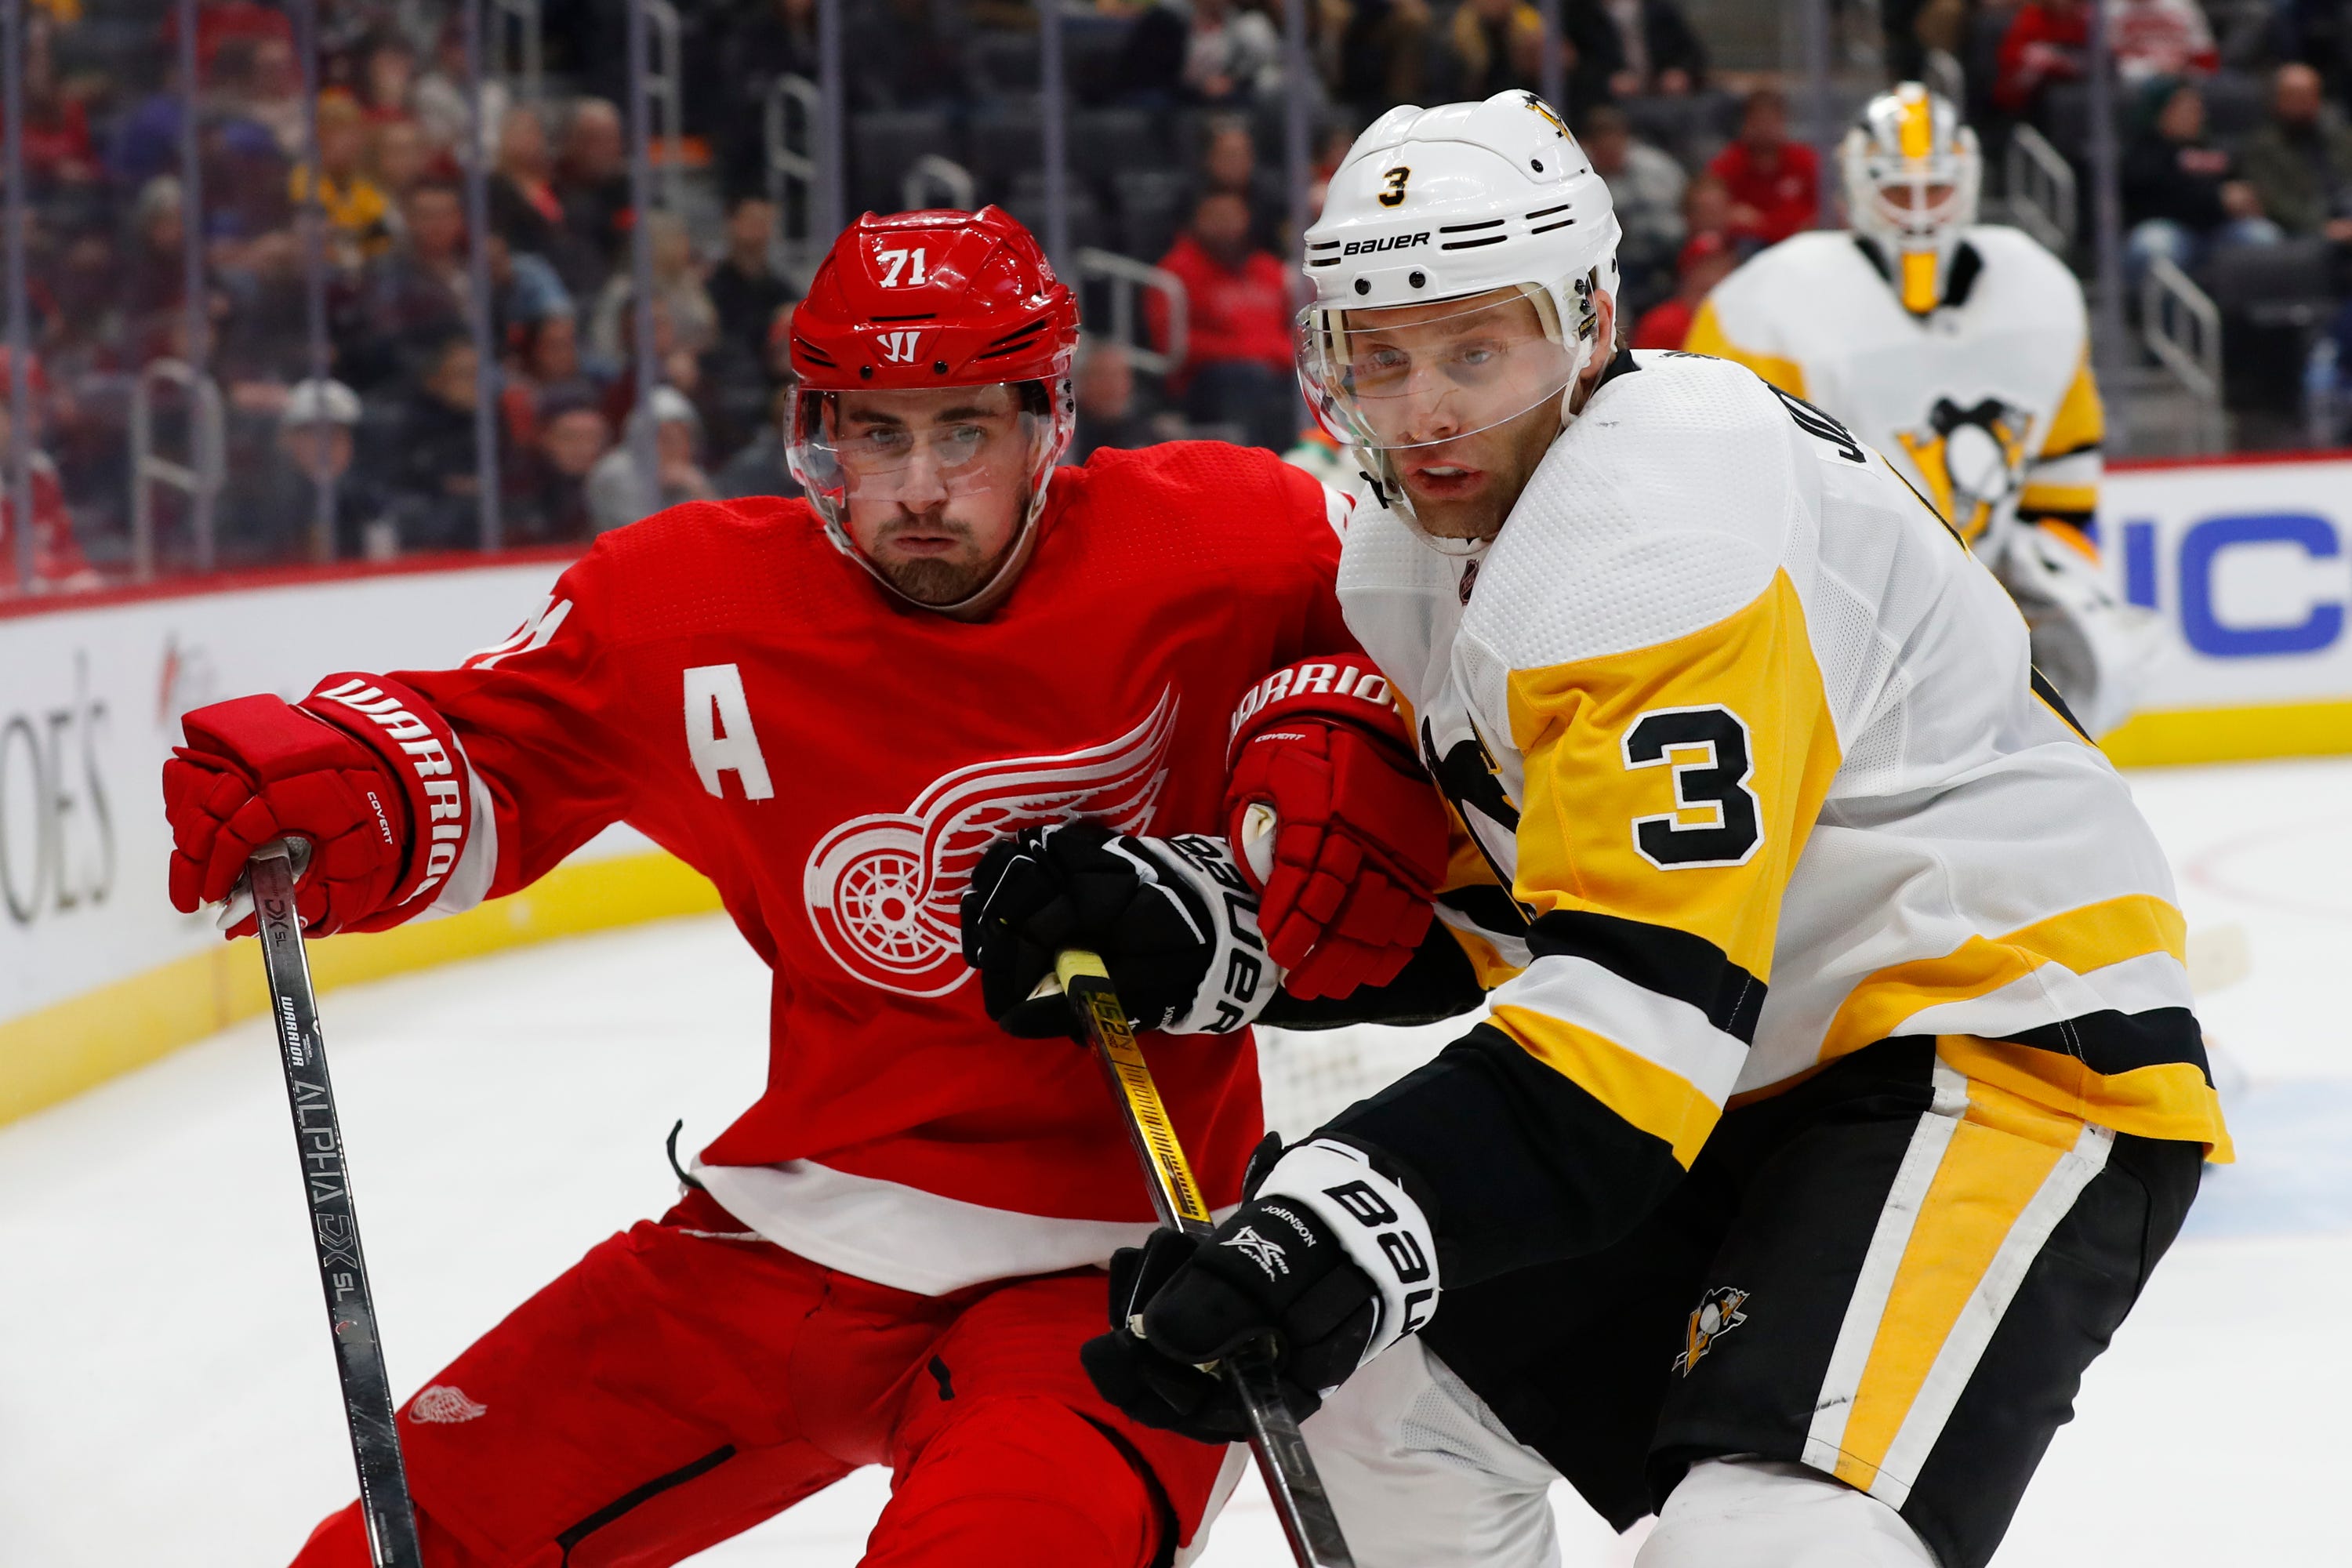 Detroit Red Wings center Dylan Larkin (71) and Pittsburgh Penguins defenseman Jack Johnson (3) battle for position in the second period.